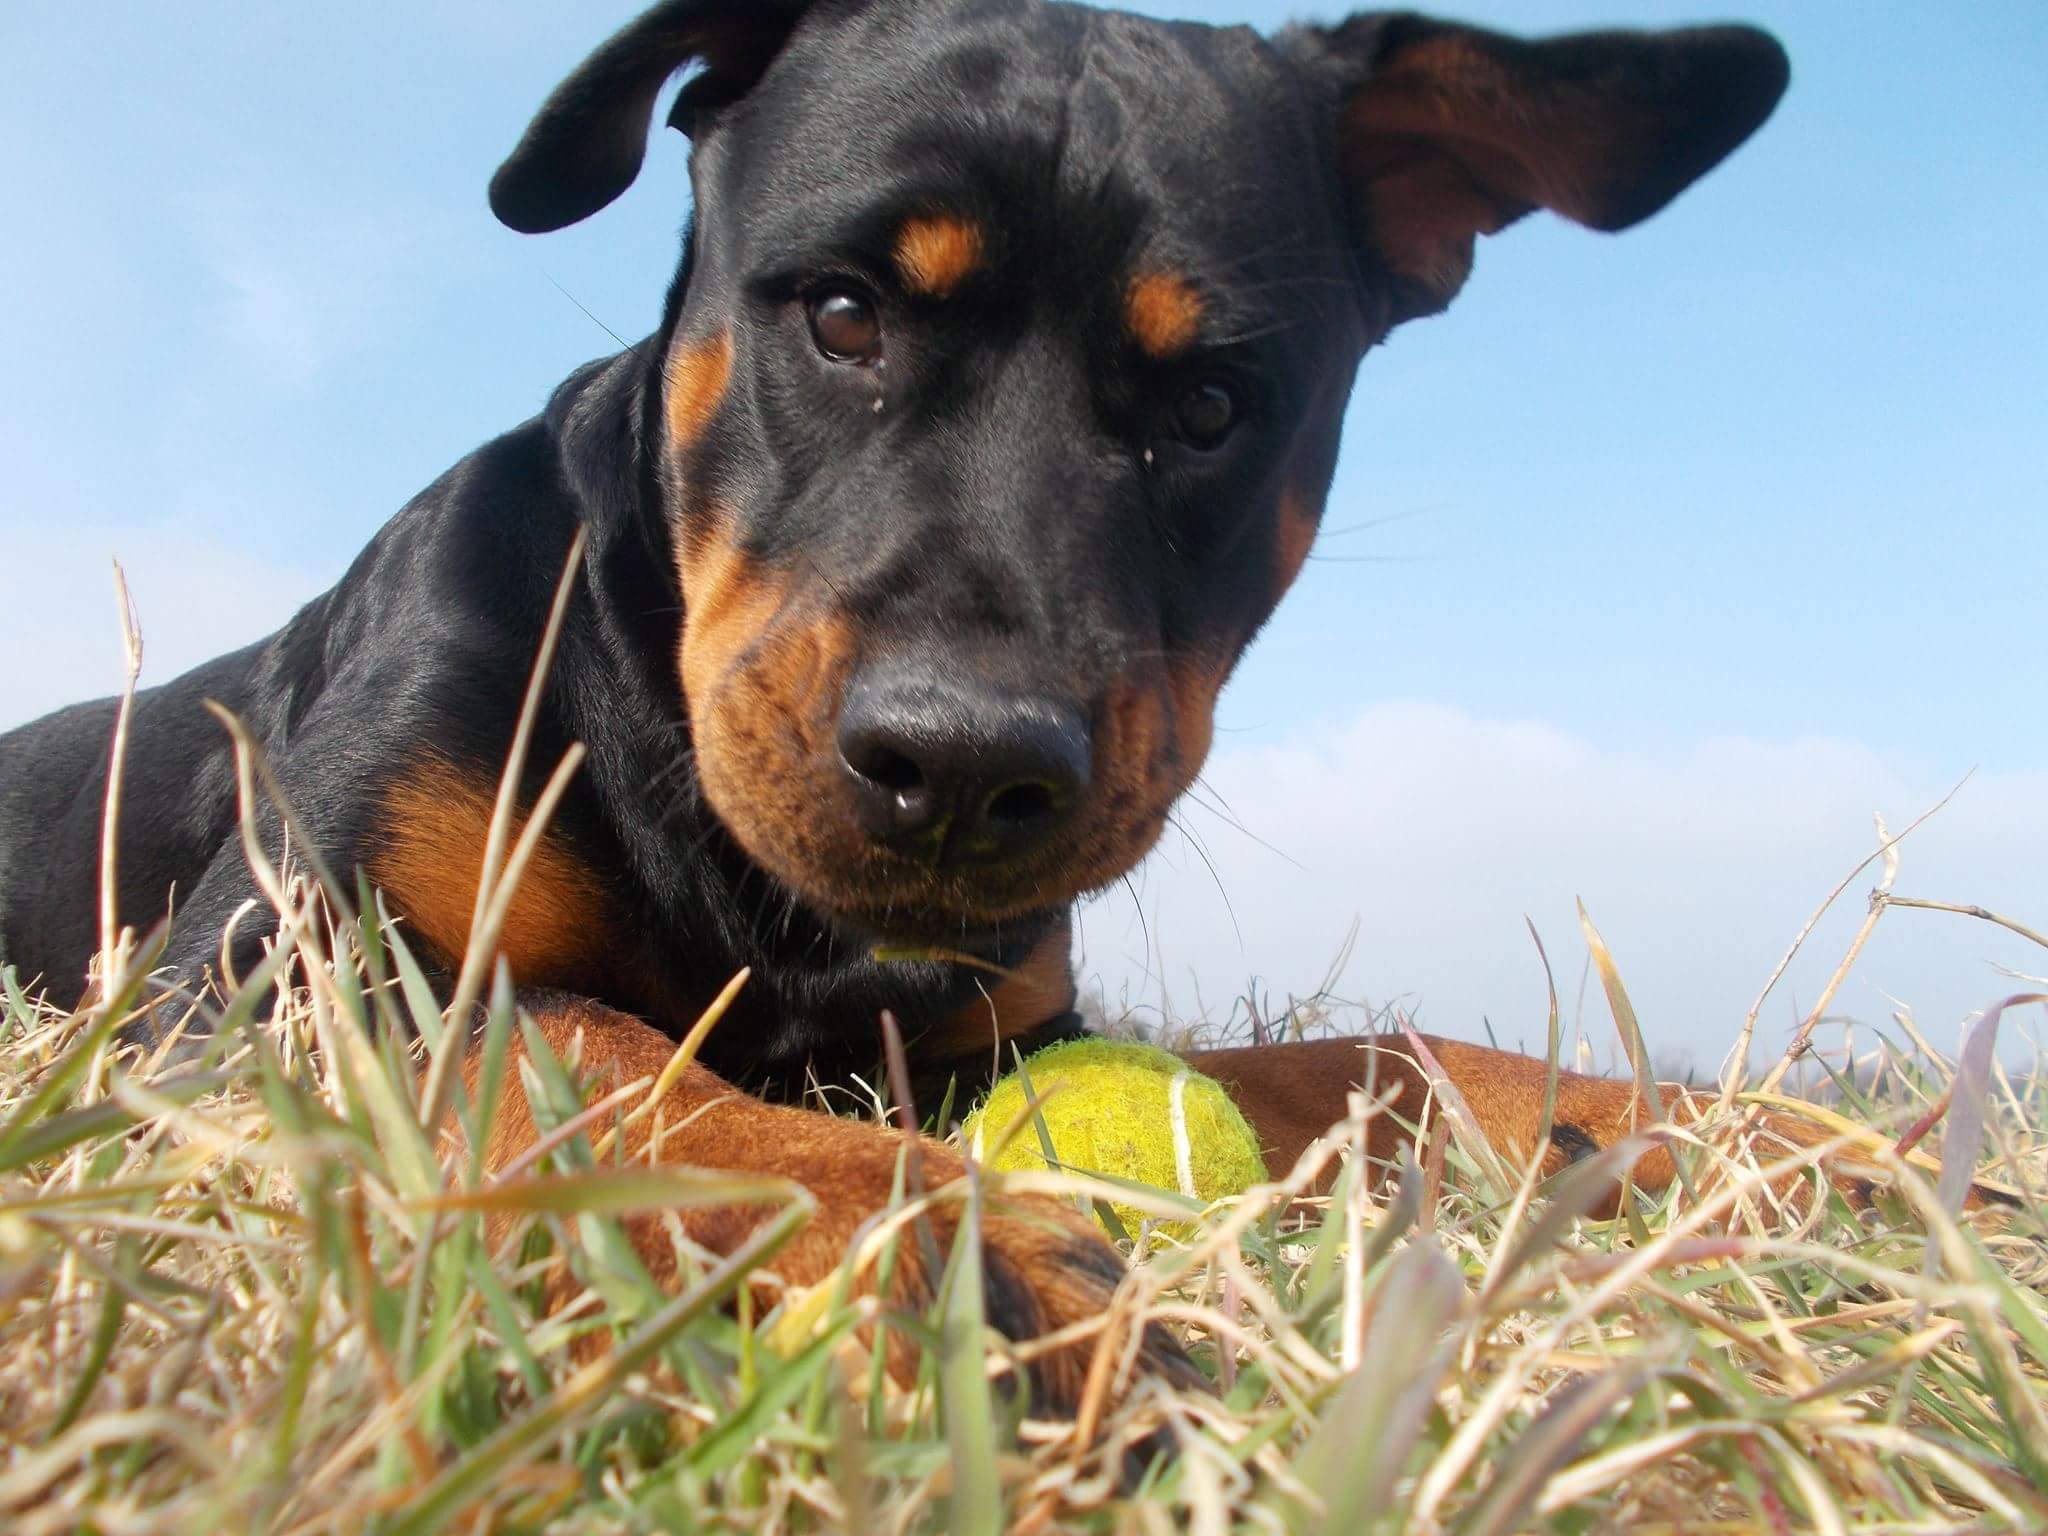 Rottweiler puppy lying on the grass with its tennis ball